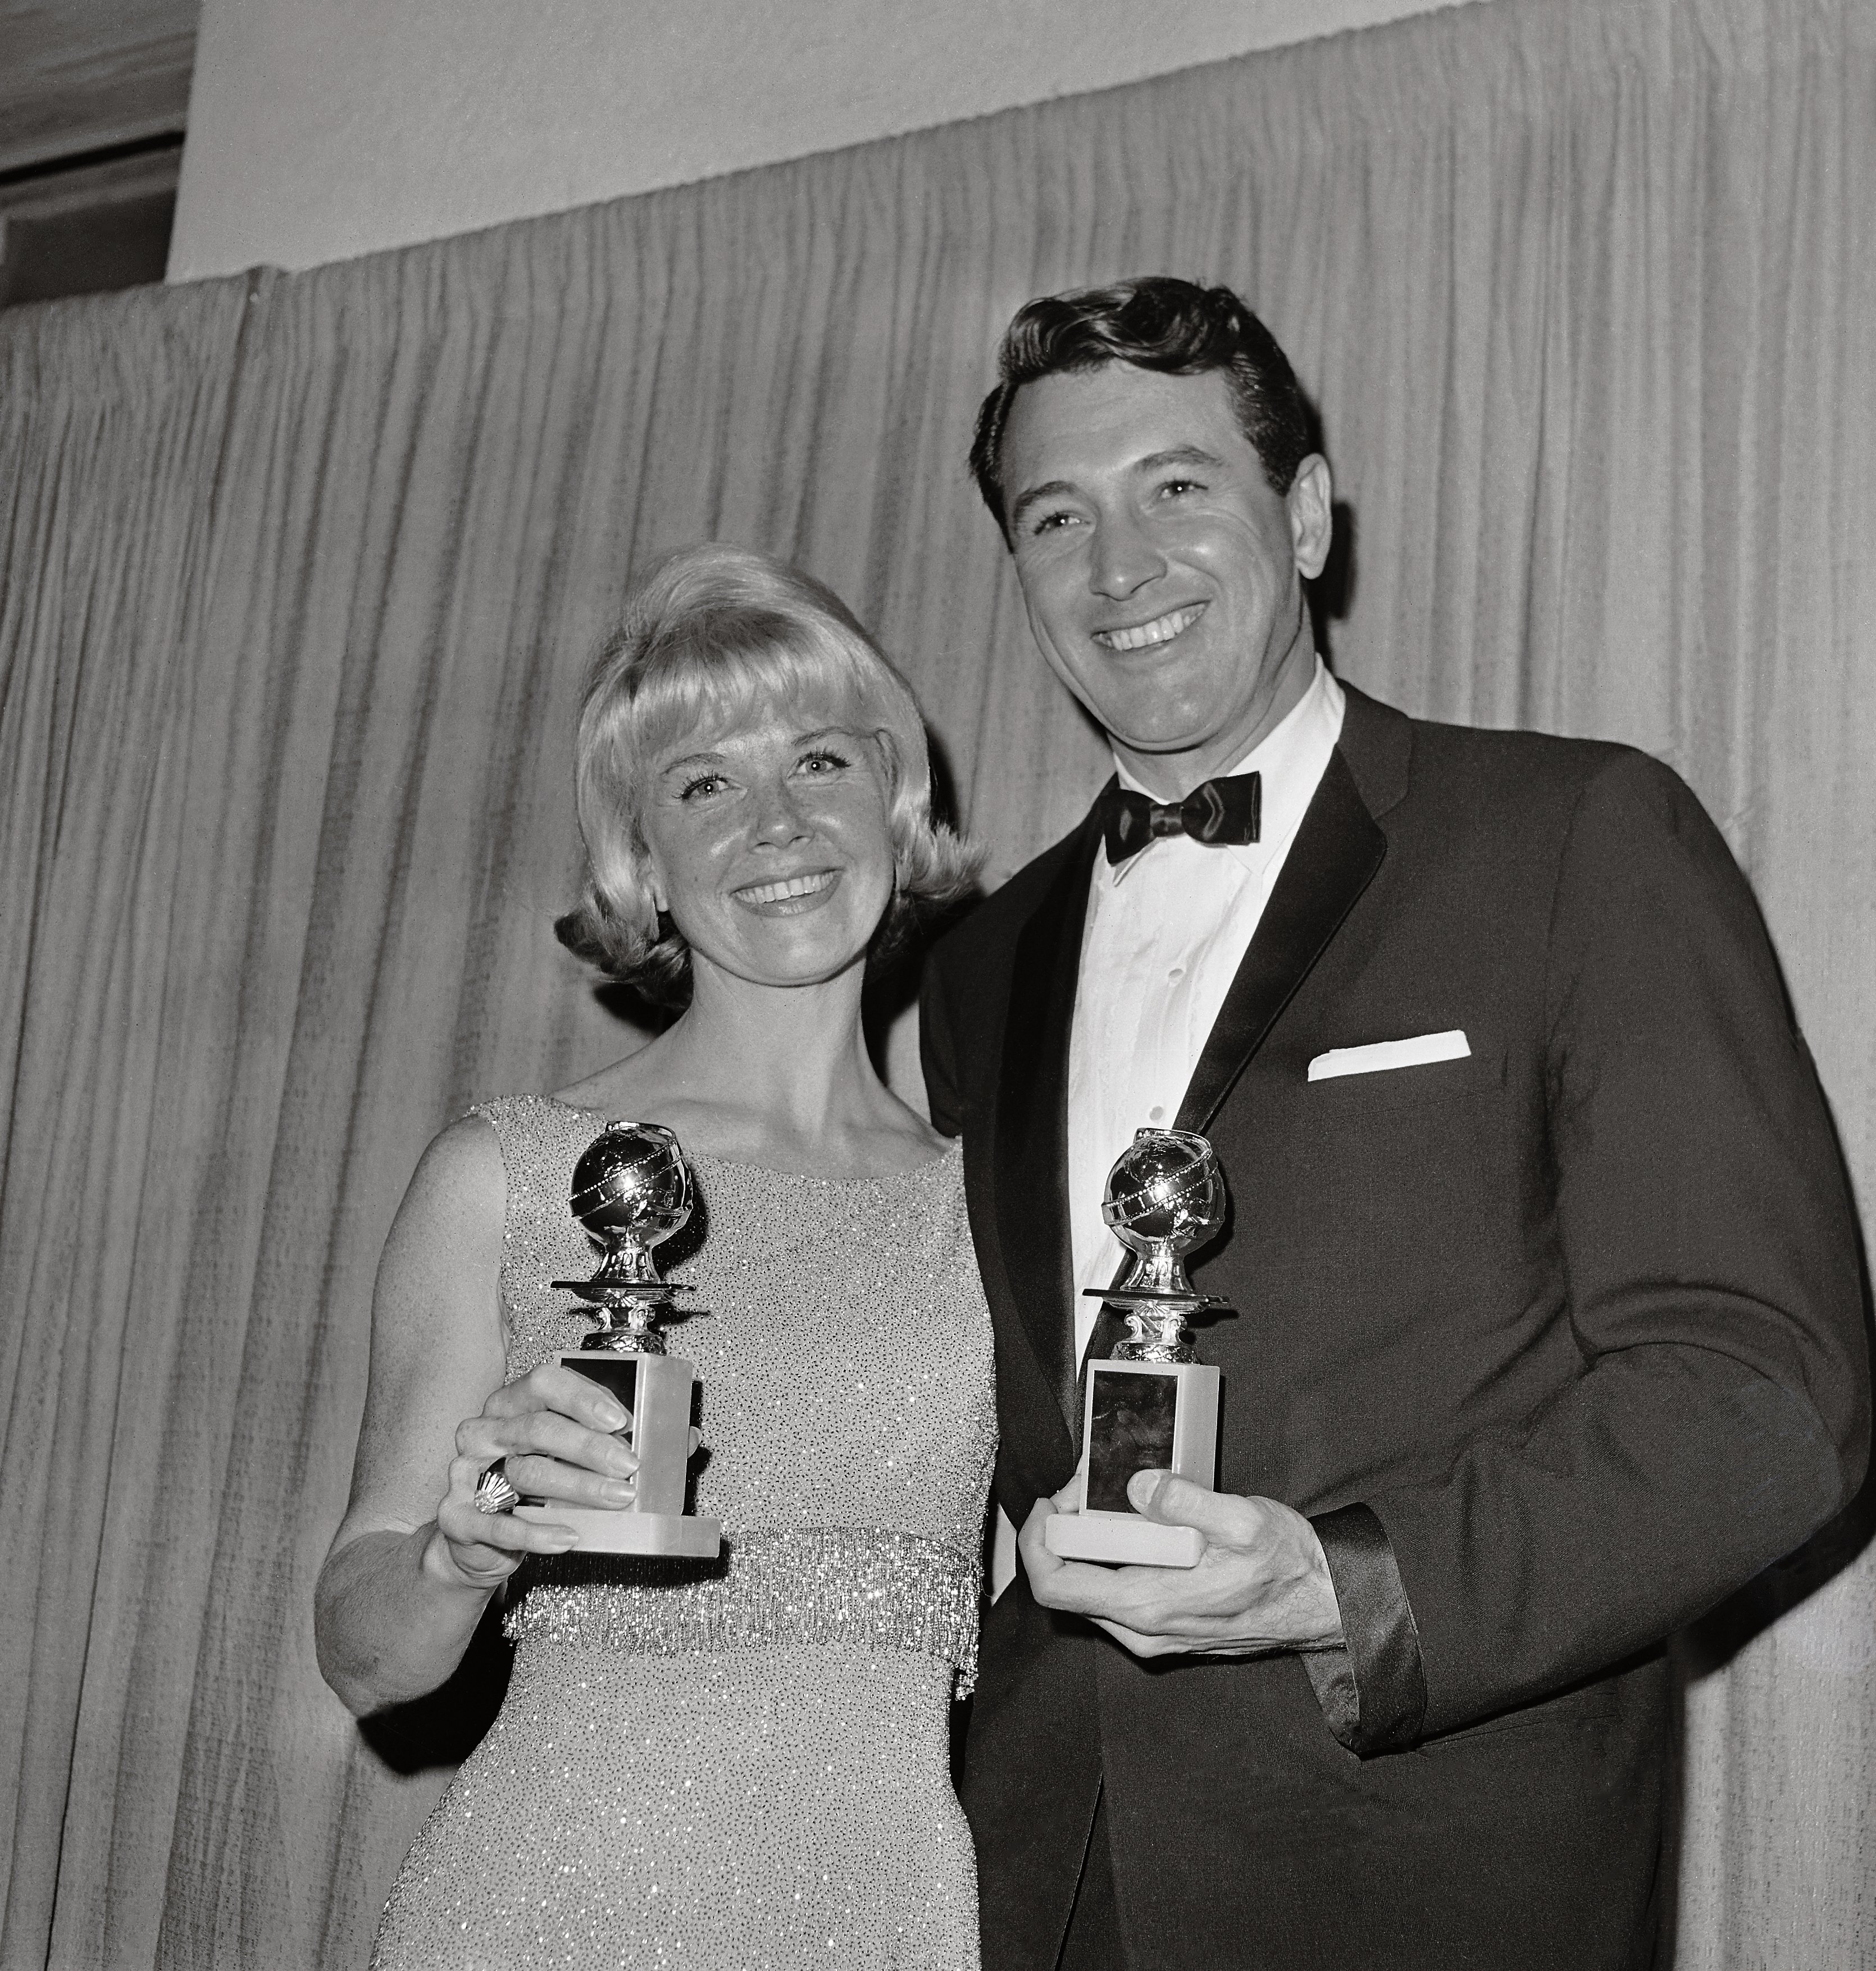 Rock Hudson and Doris Day pose for a picture after winning the Golden Globes | Source: Getty Images